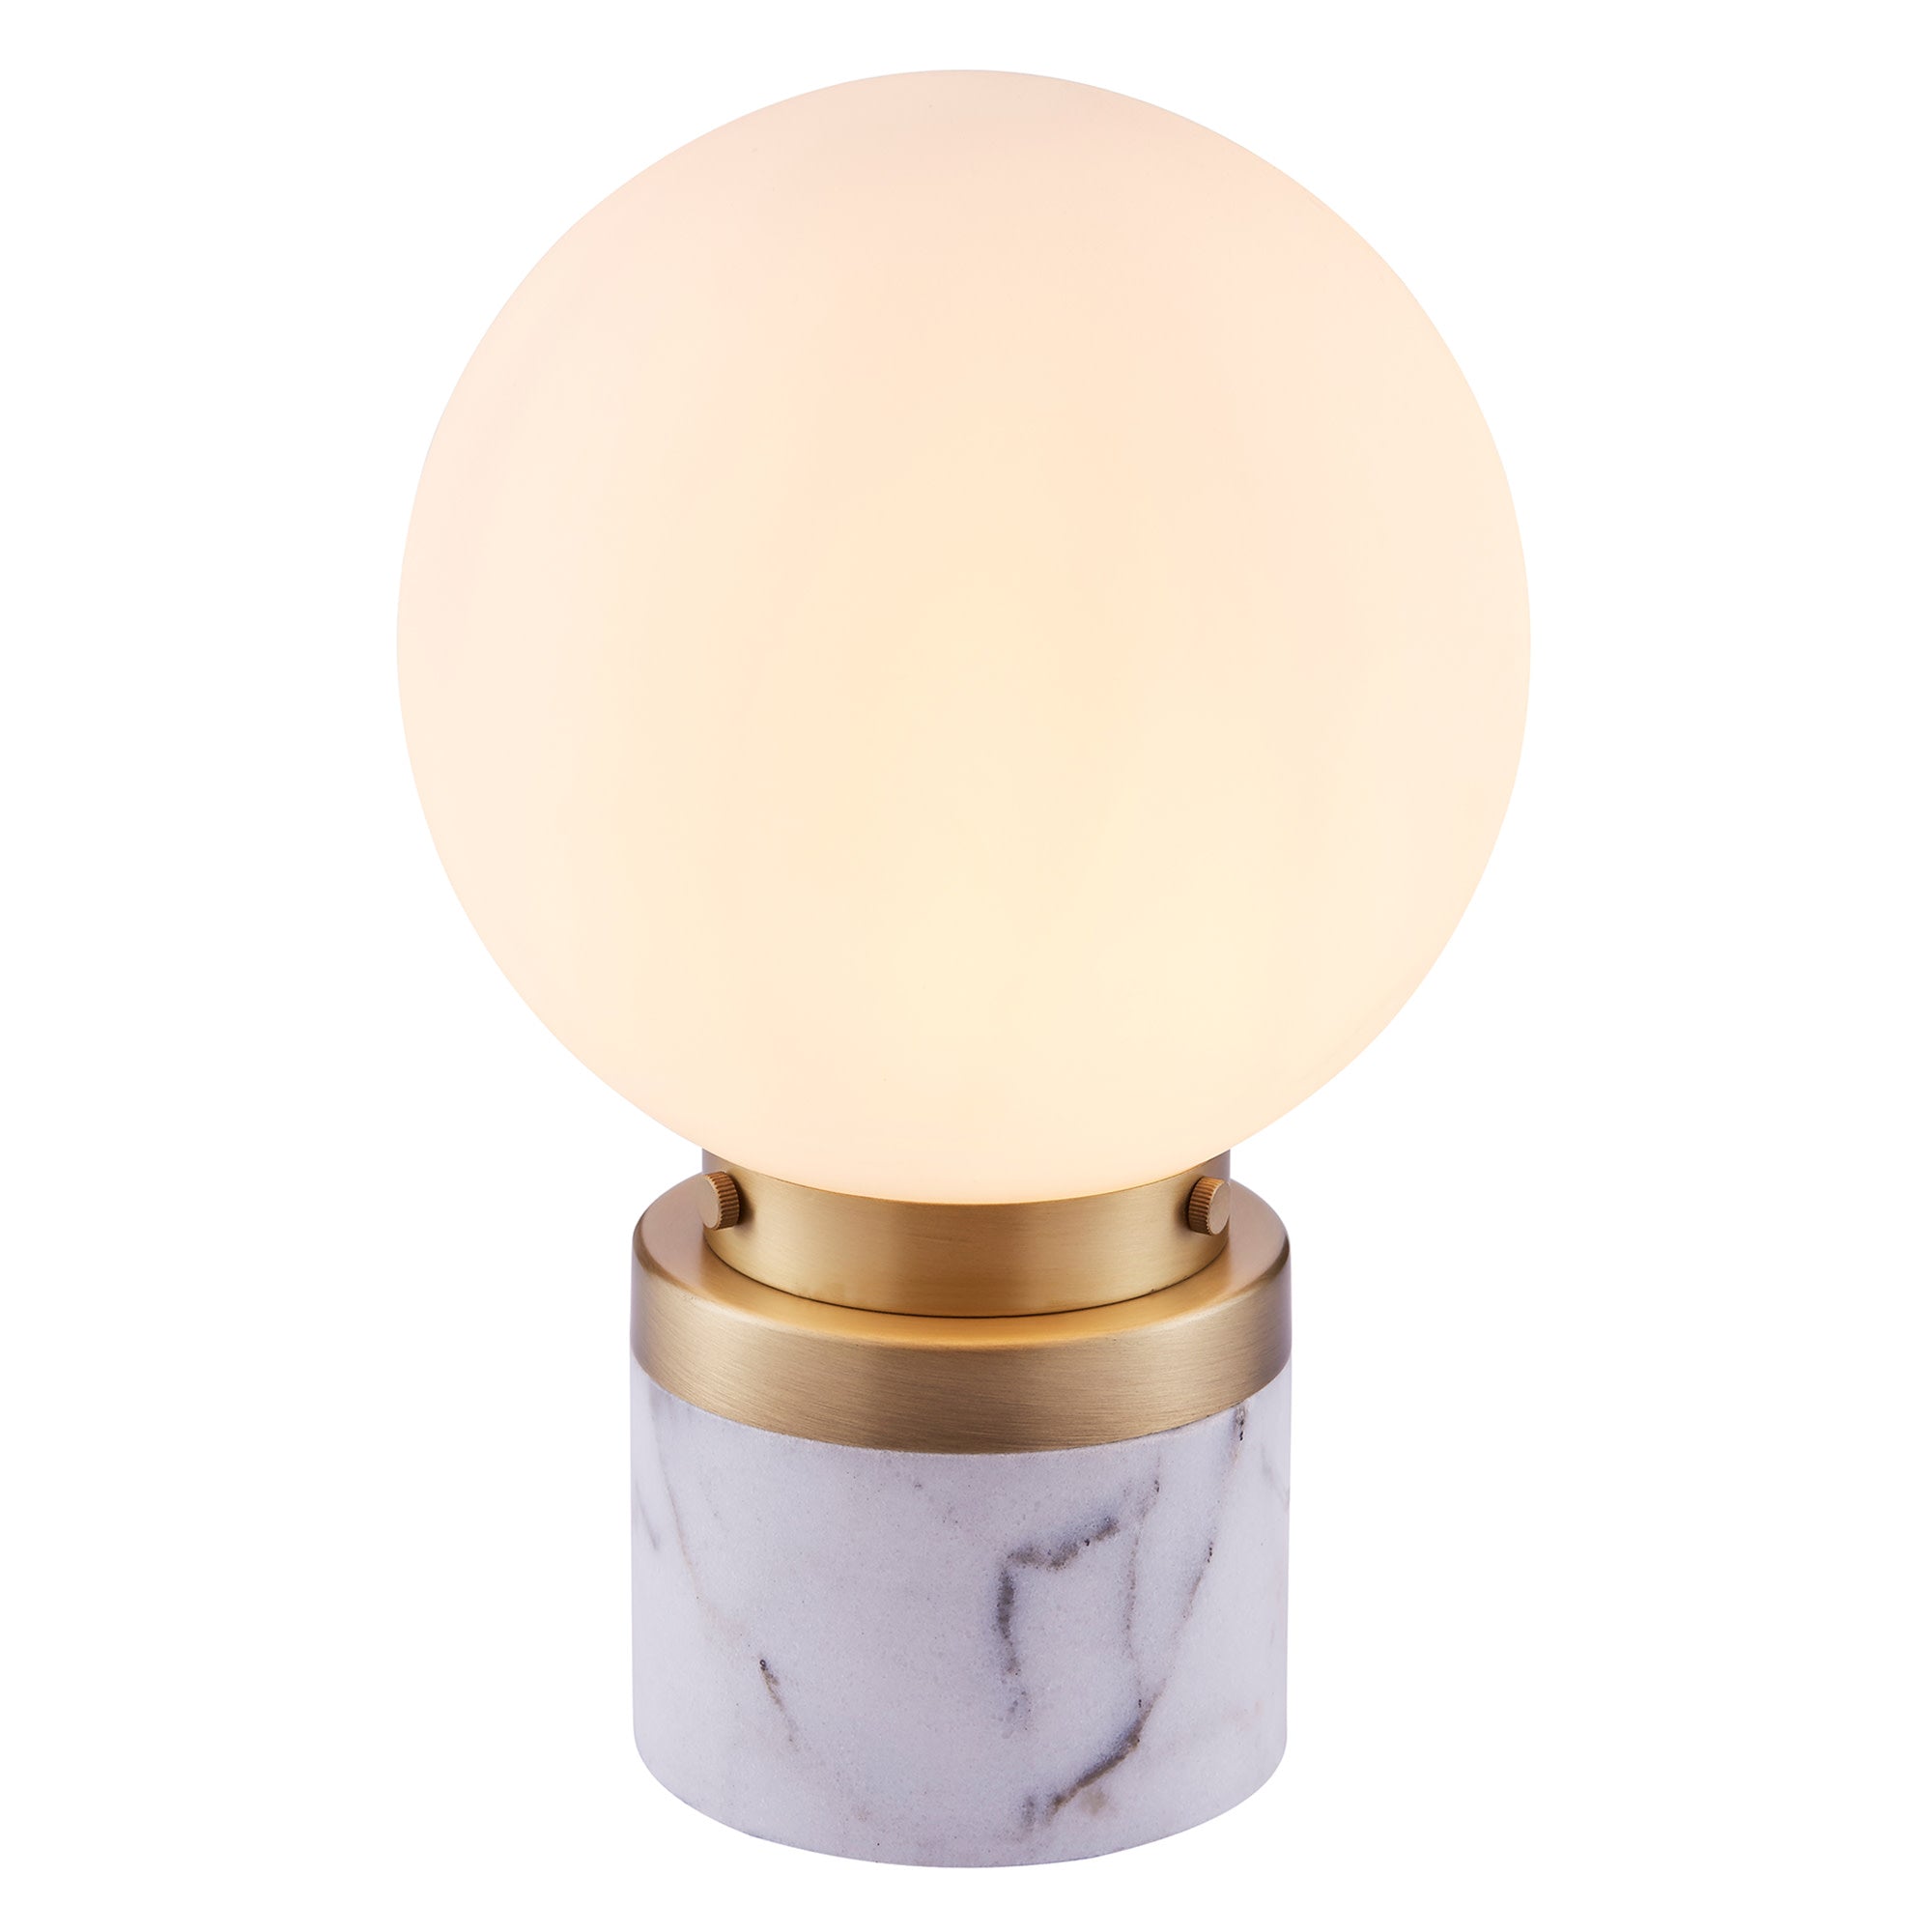 Versanora - Claire Table Lamp With Marble Base White shade